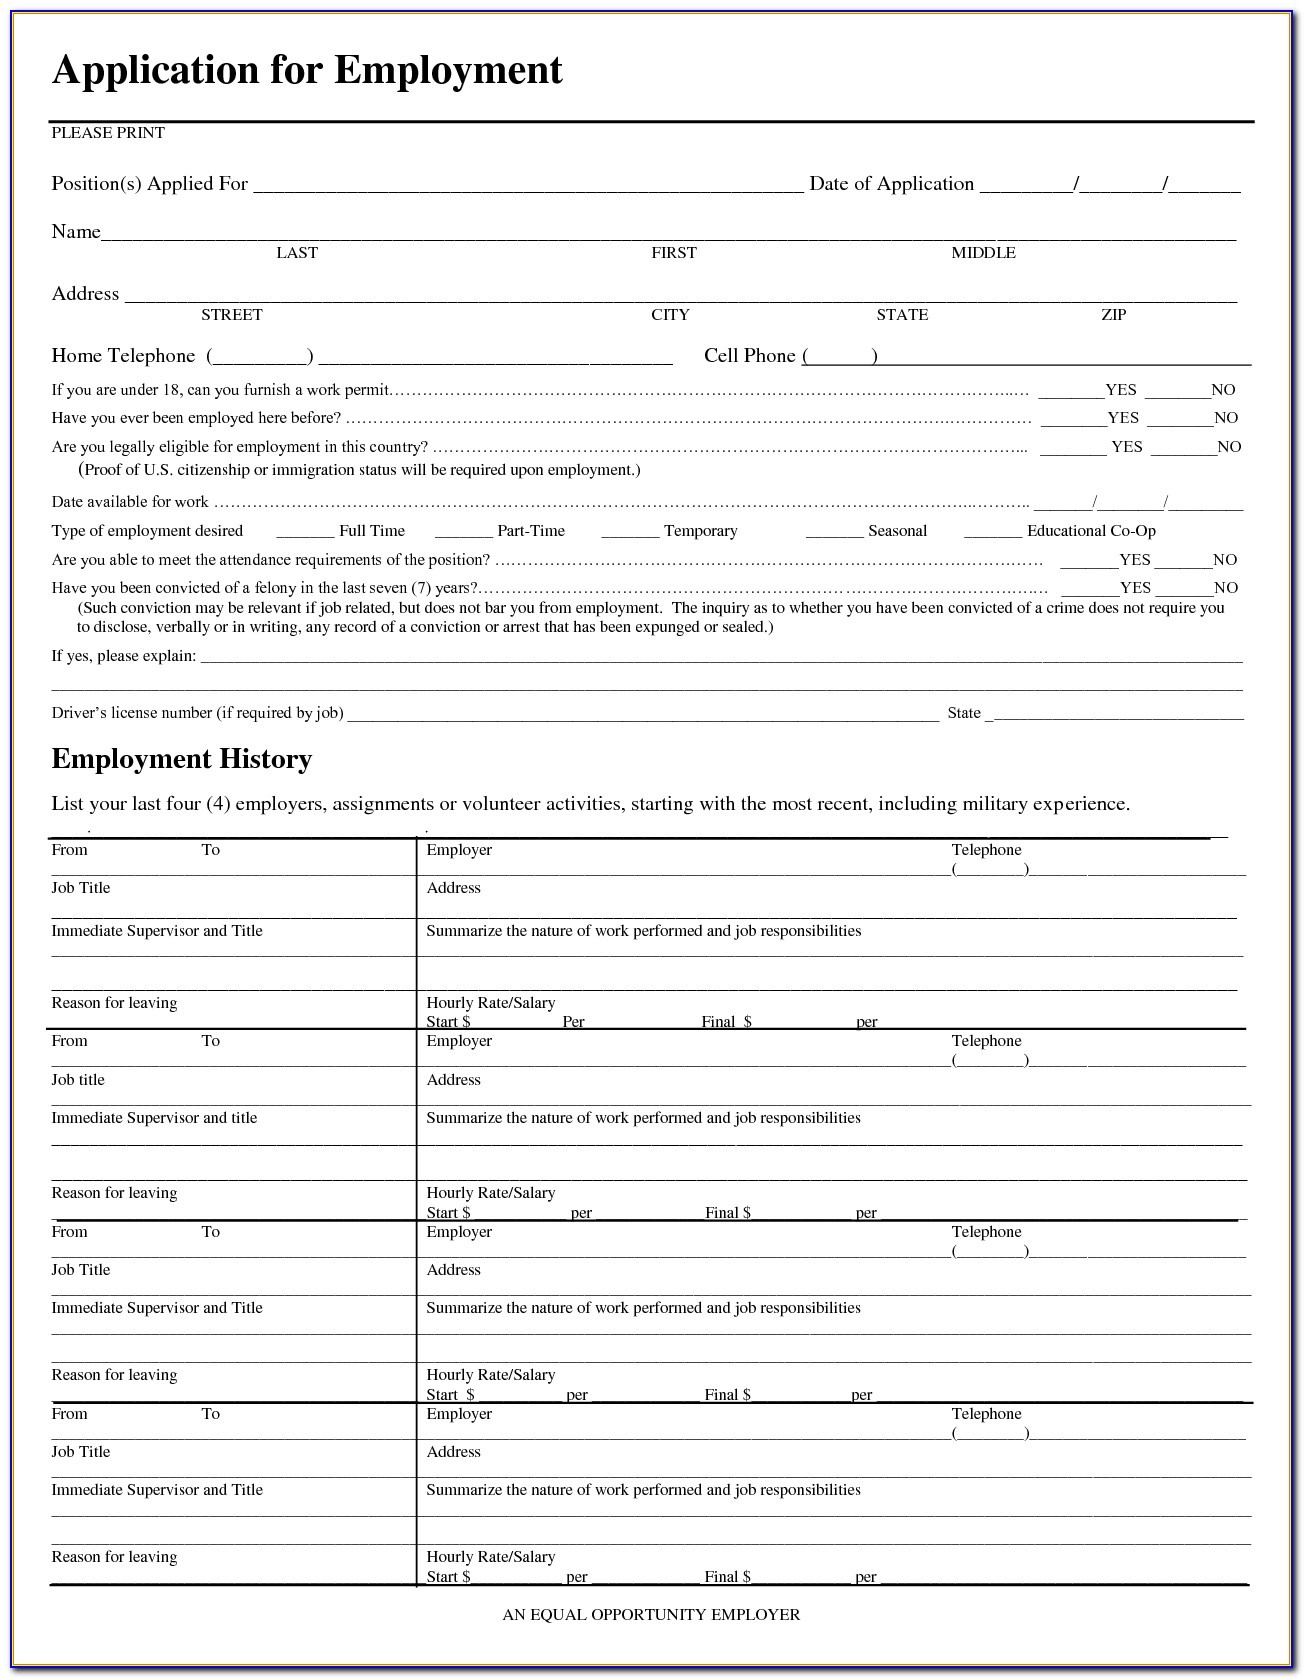 Employment Application Forms Free Printable - Form : Resume Examples - Free Printable Job Application Form